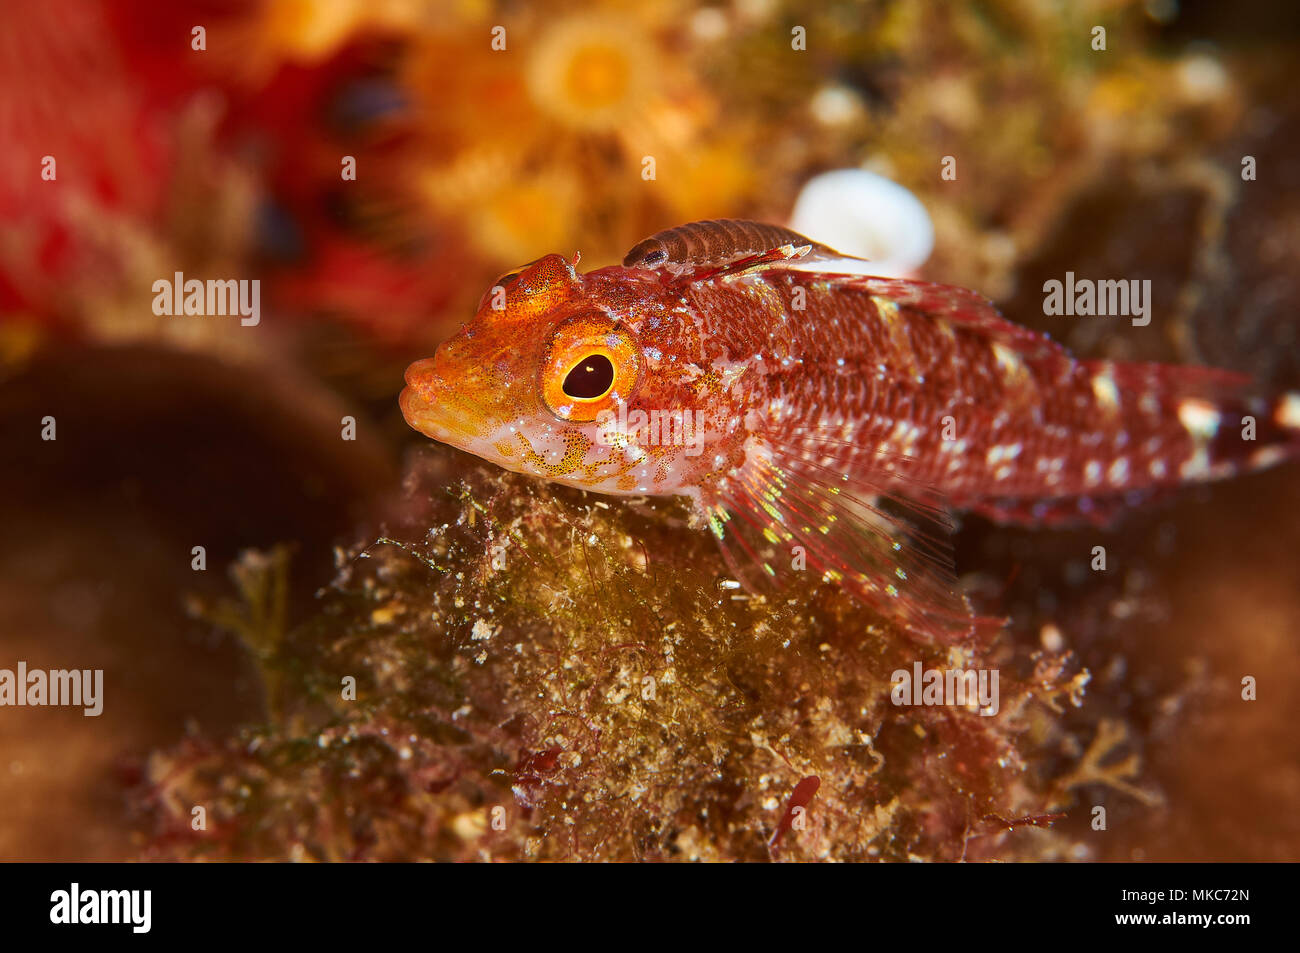 Underwater view of a yellow black-faced blenny (Tripterygion delaisi) portrait with a parasite isopod (Anilocra physodes) (Mediterranean Sea, Spain) Stock Photo